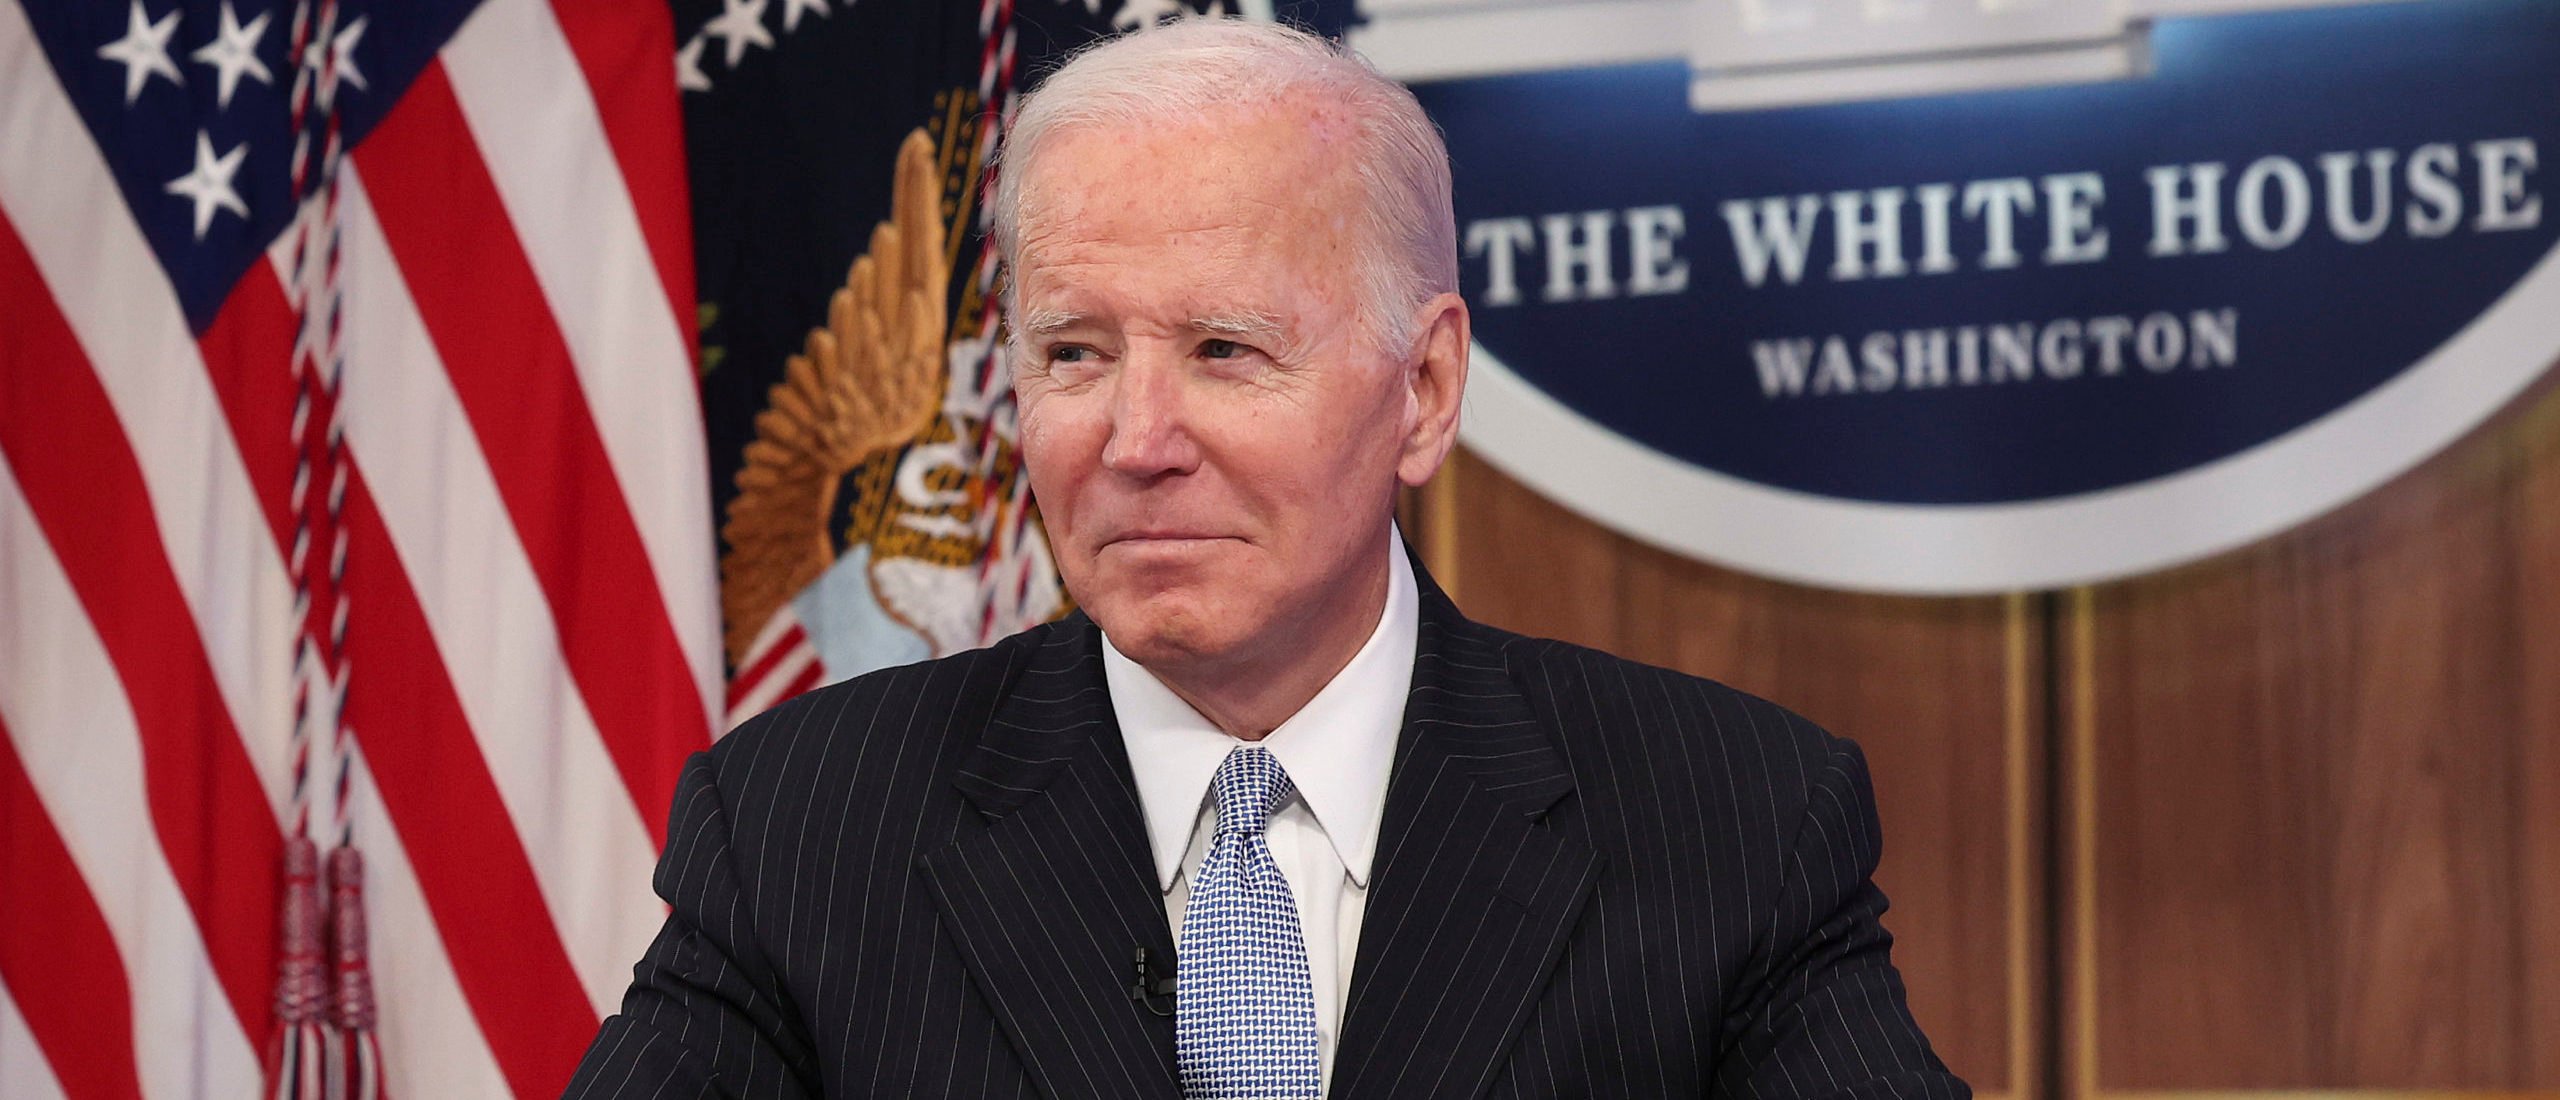 Biden Asks Congress To Force Rail Unions Into Administration-Brokered Deal As Strike Threat Looms